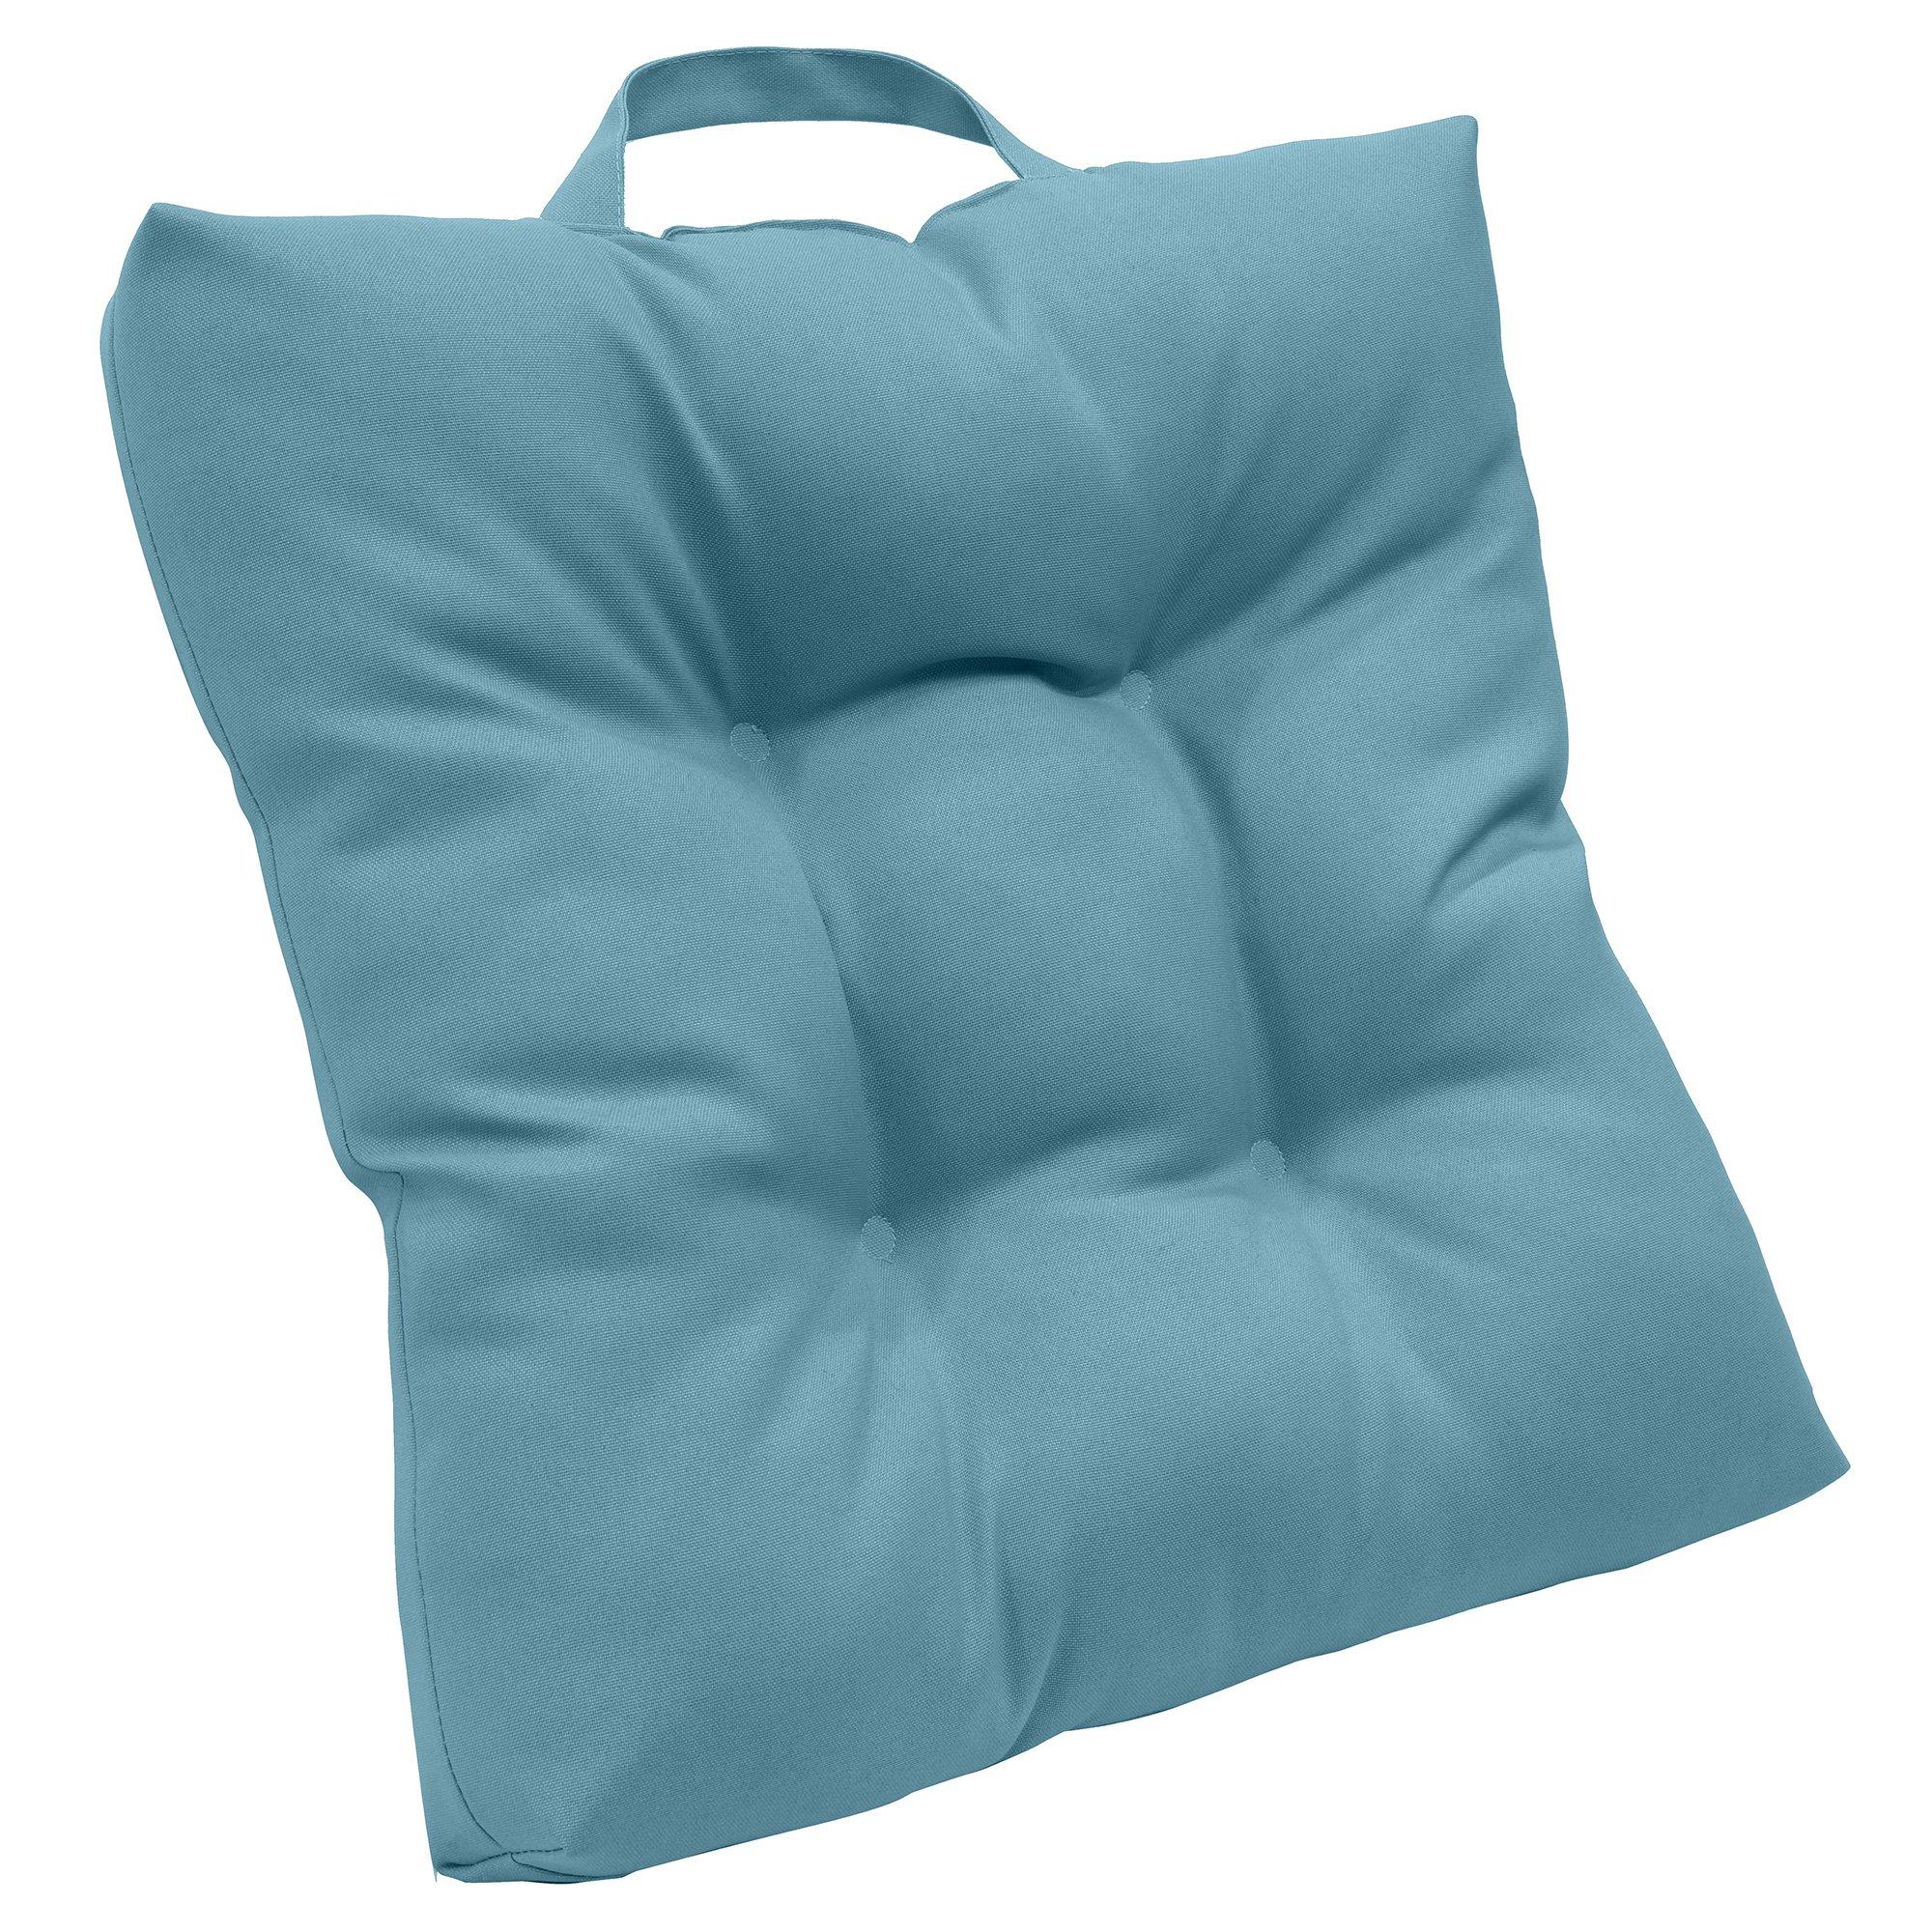 Outdoor Decor By Commonwealth Single Seat Cushion